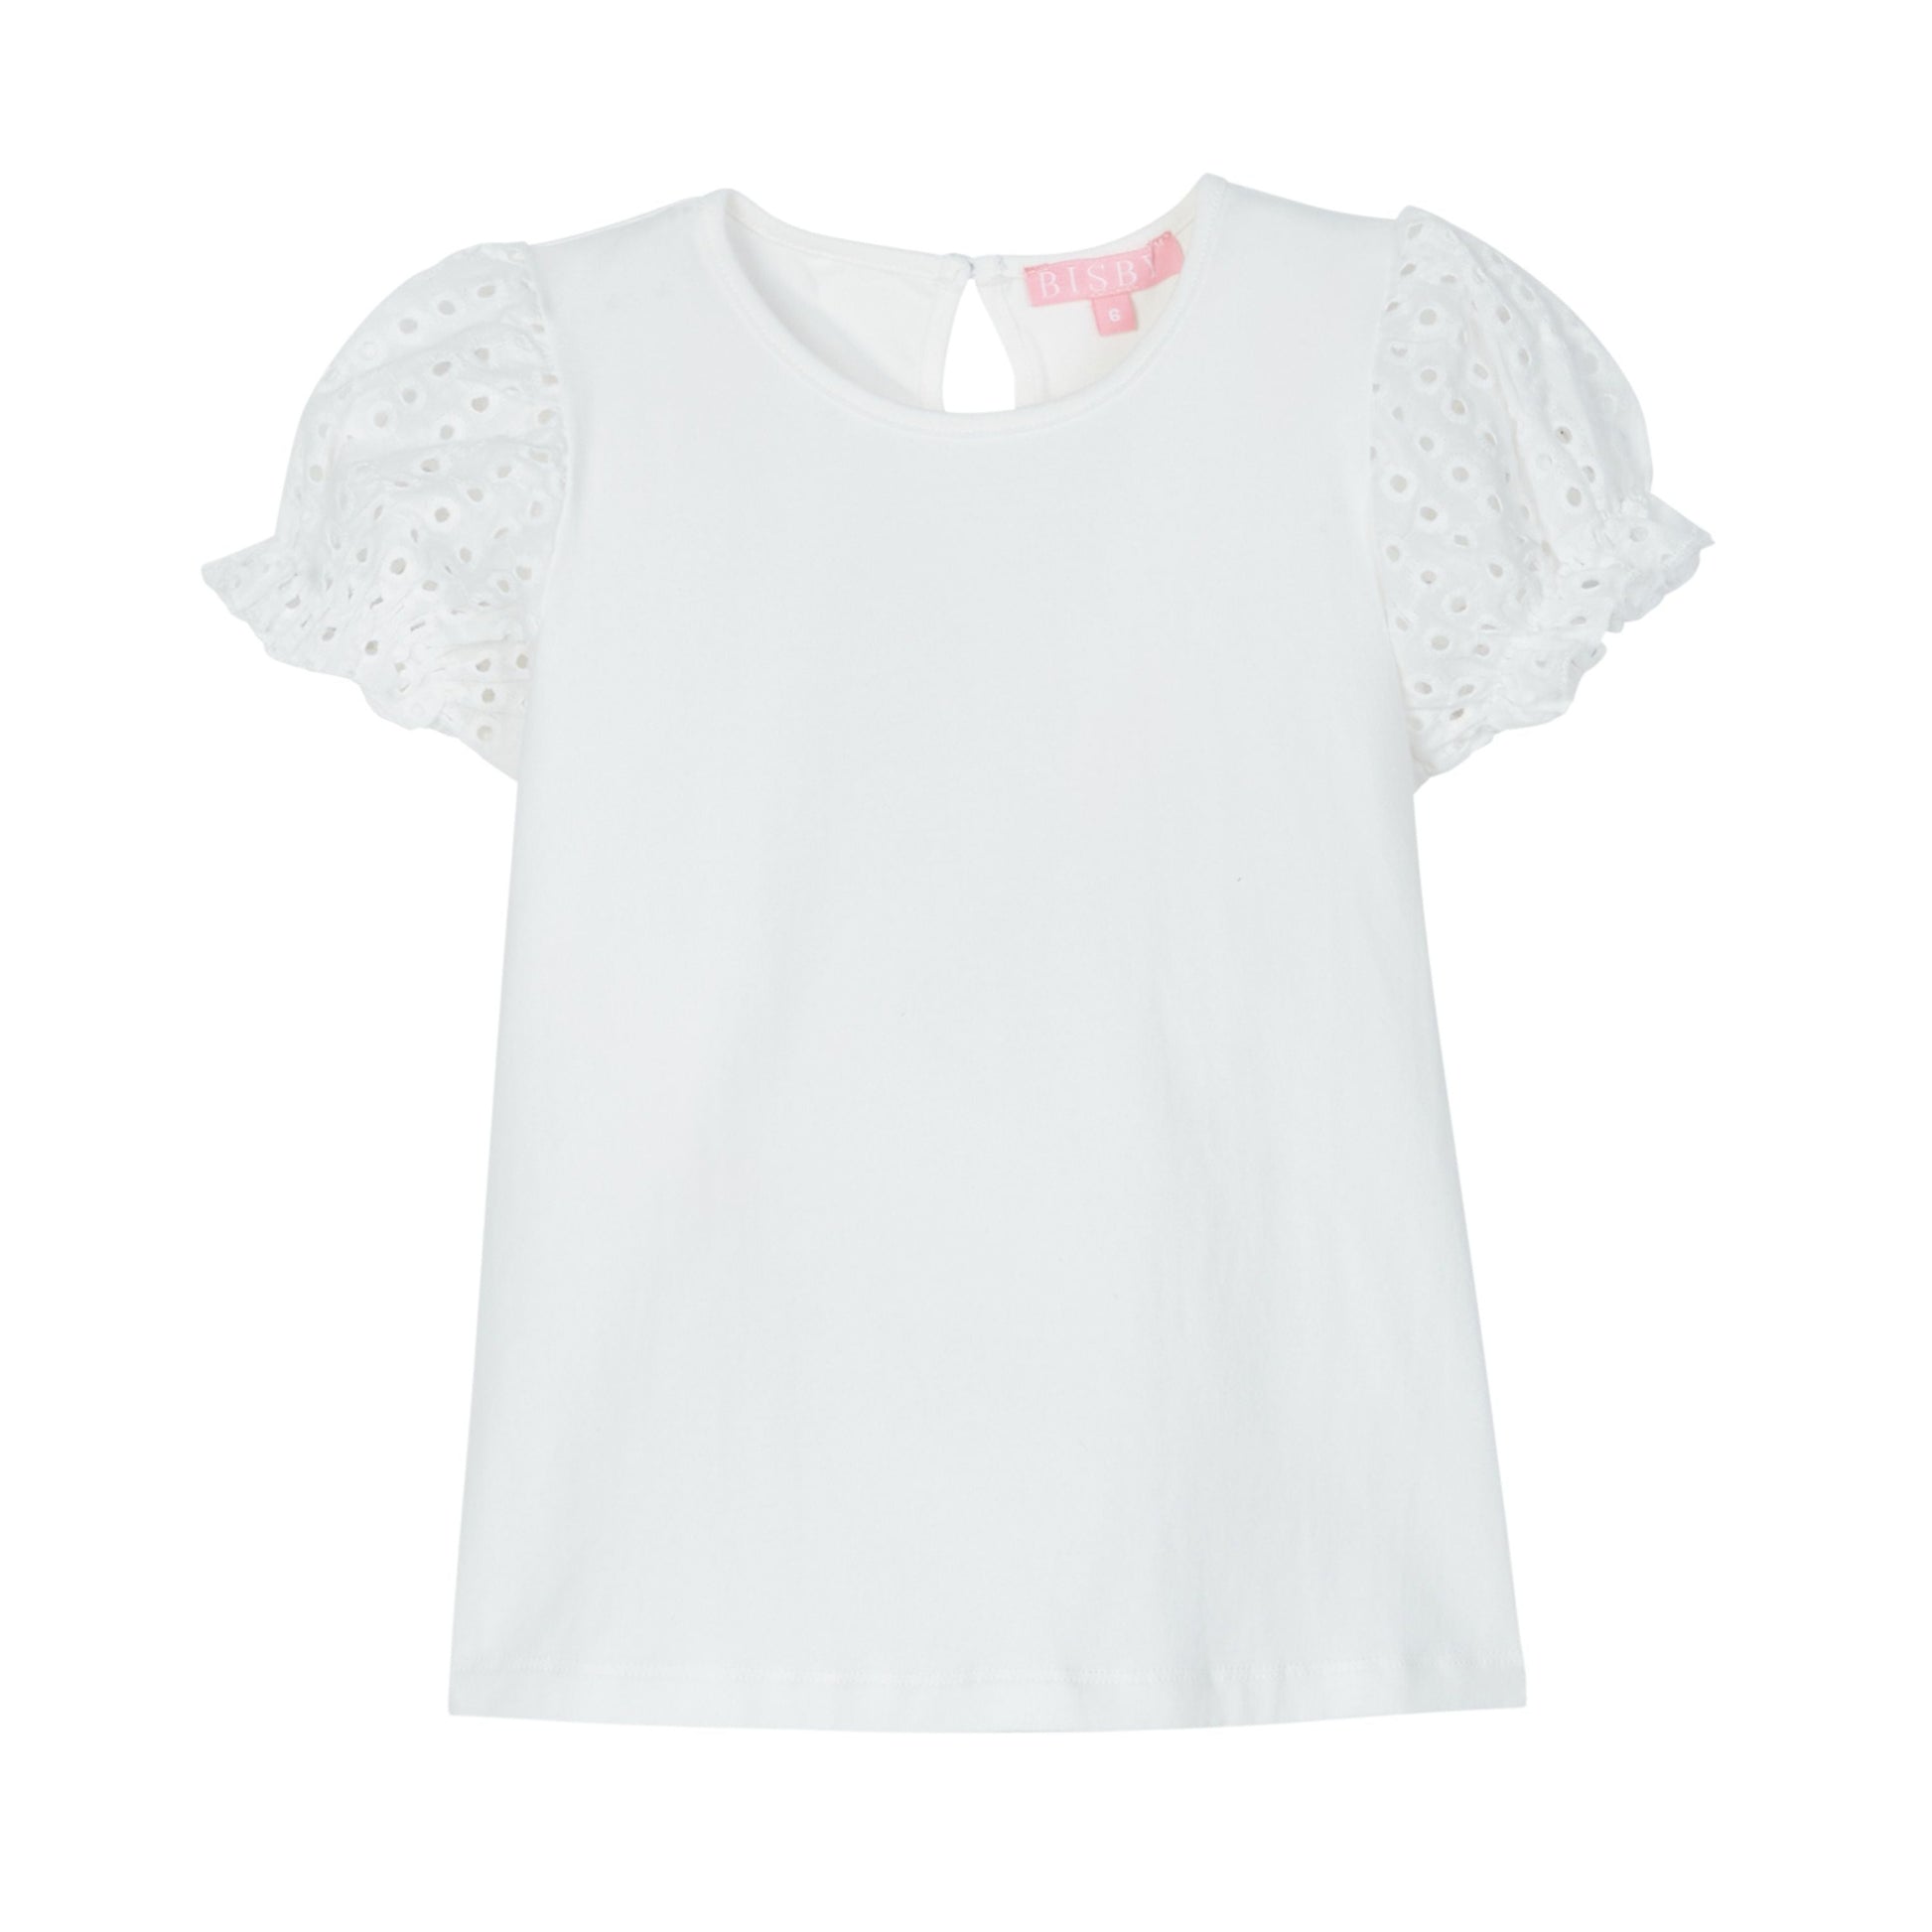 BISBY Contrast Sleeve Tee- White Eyelet